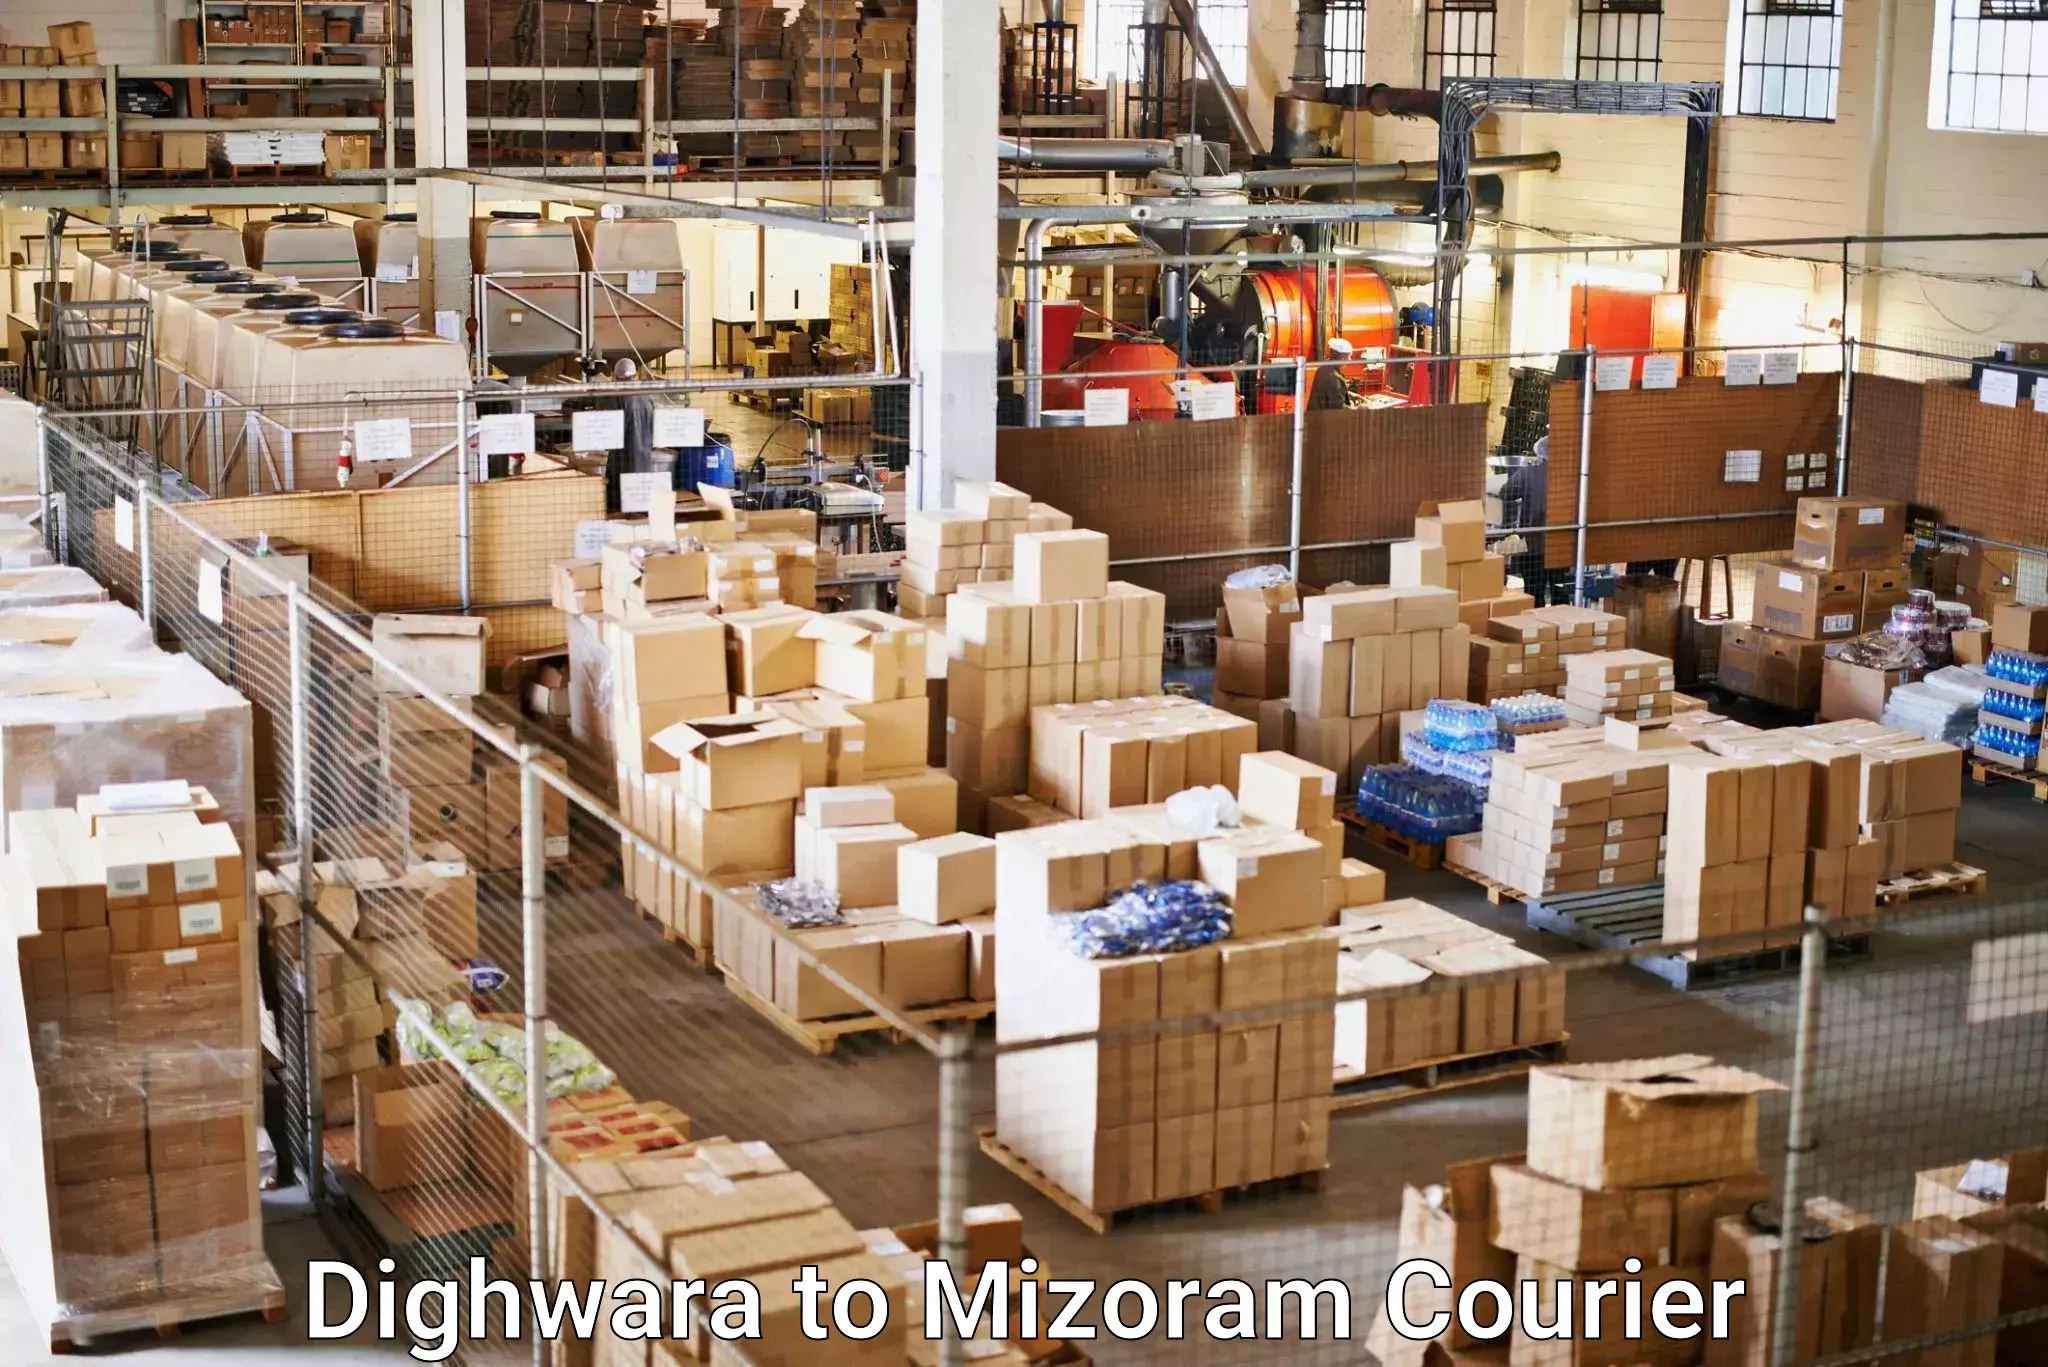 Overnight delivery services Dighwara to Mizoram